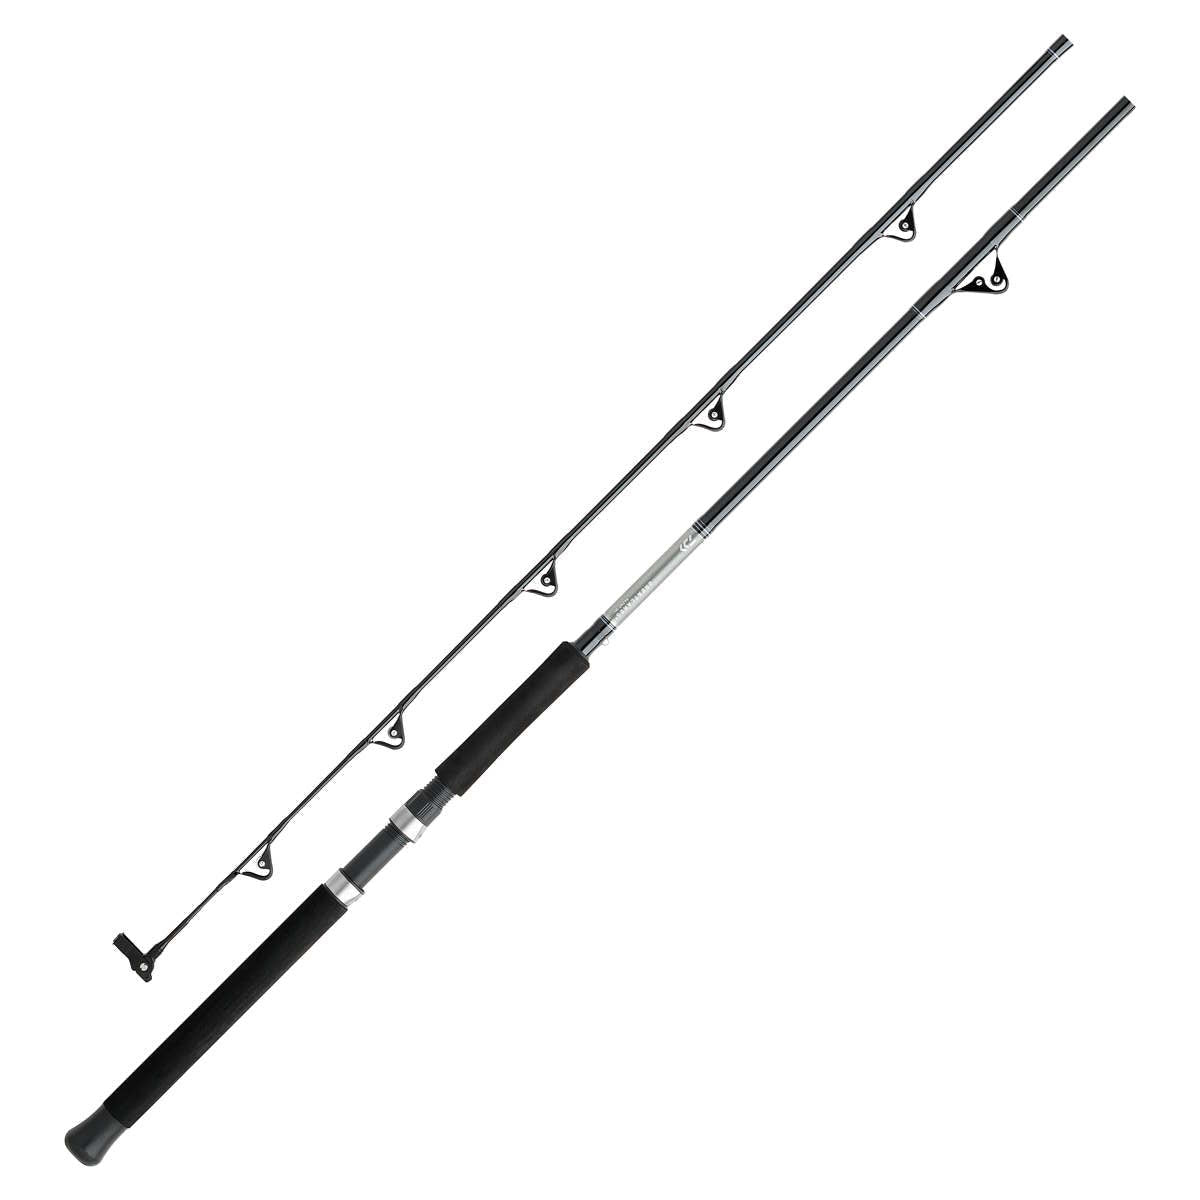 Photo of Daiwa Great Lakes Specialty Series Wire Line Rod for sale at United Tackle Shops.